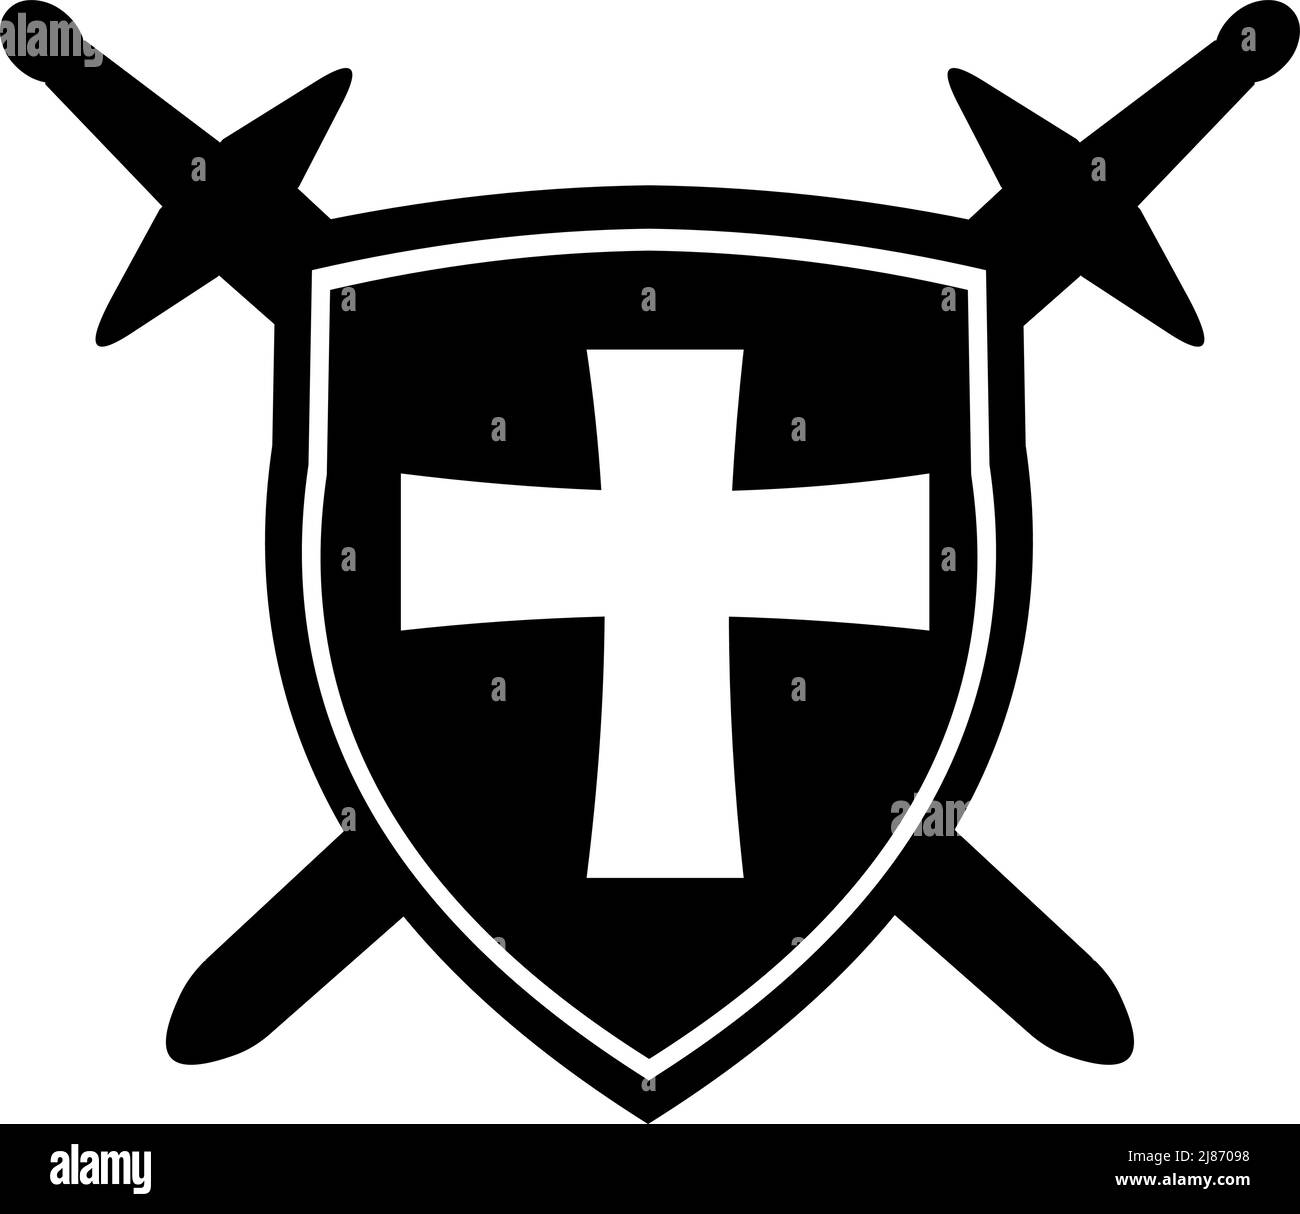 What does the symbol with a shield and two swords next to clan members'  names mean? - Arqade